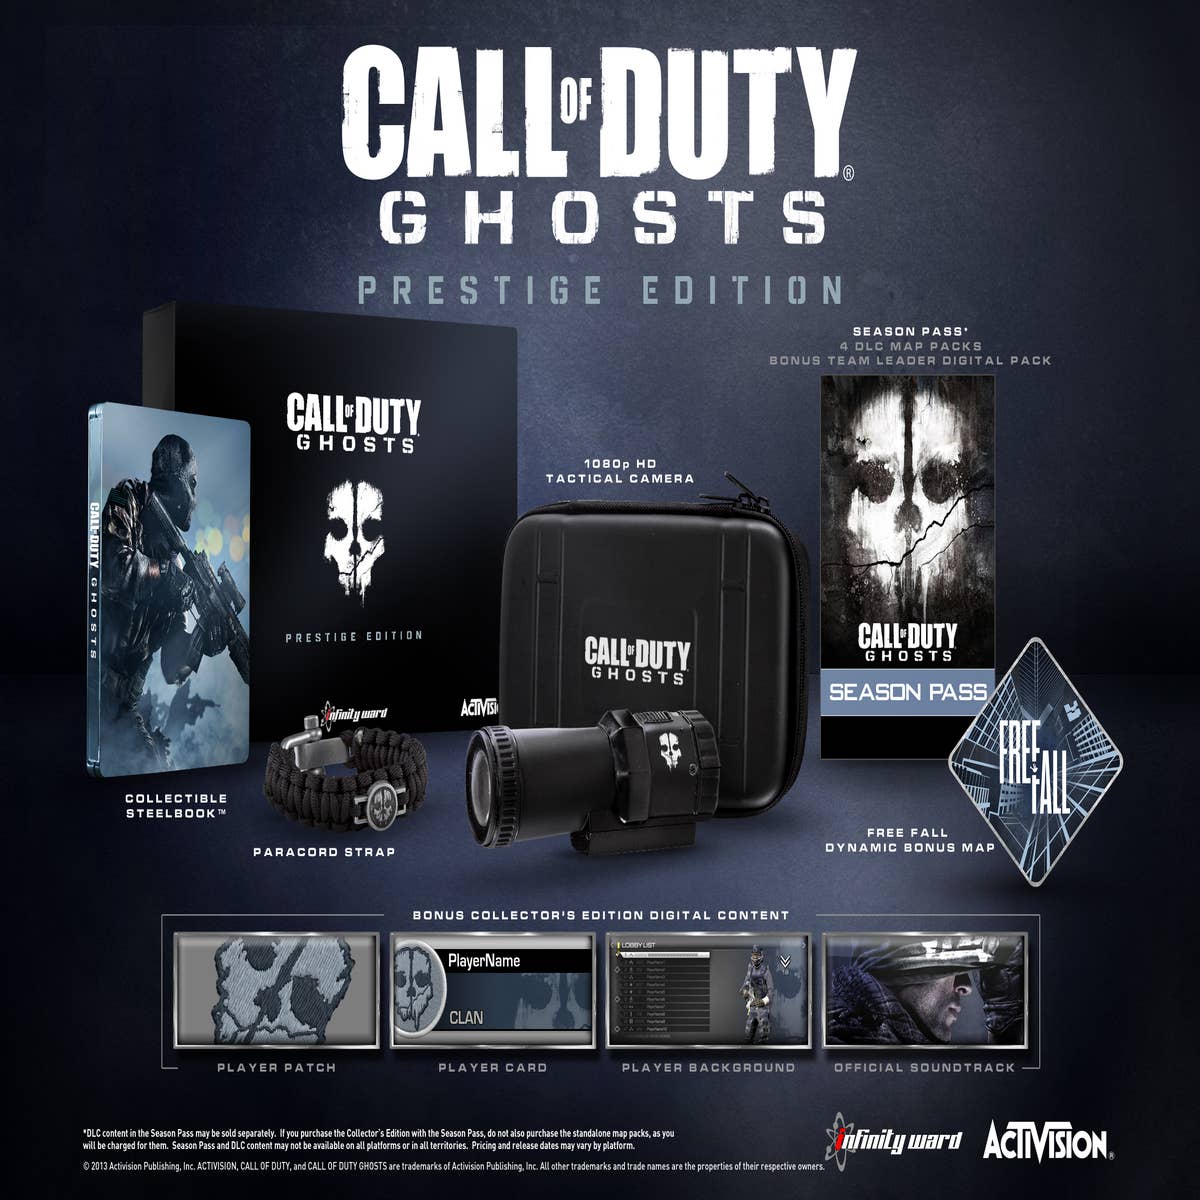 CALL OF DUTY: GHOSTS 1080p HD TACTICAL CAMERA ACTIVISION (B2800)